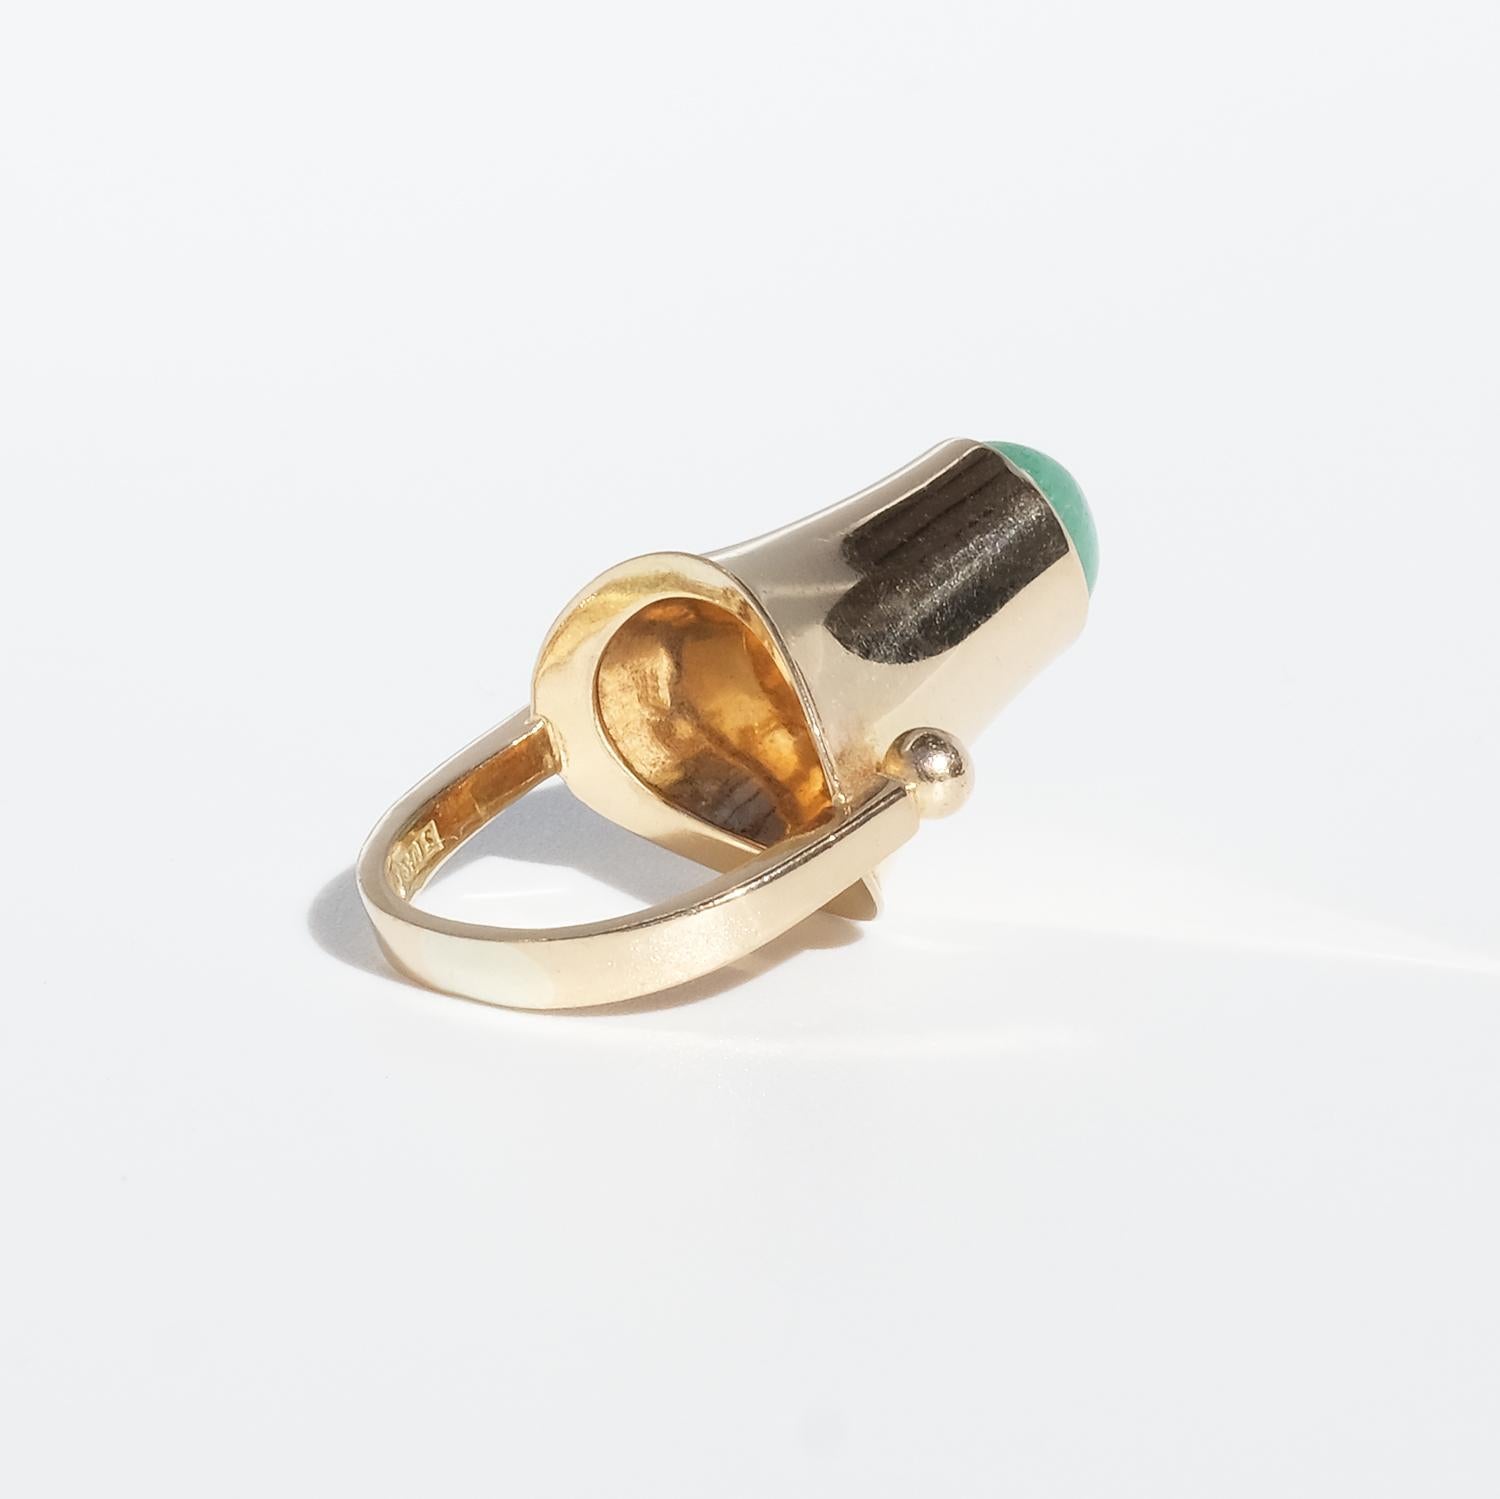 Swedish 18 K Gold Ring with an Emerald Made in 1966, Sigurd Persson 7